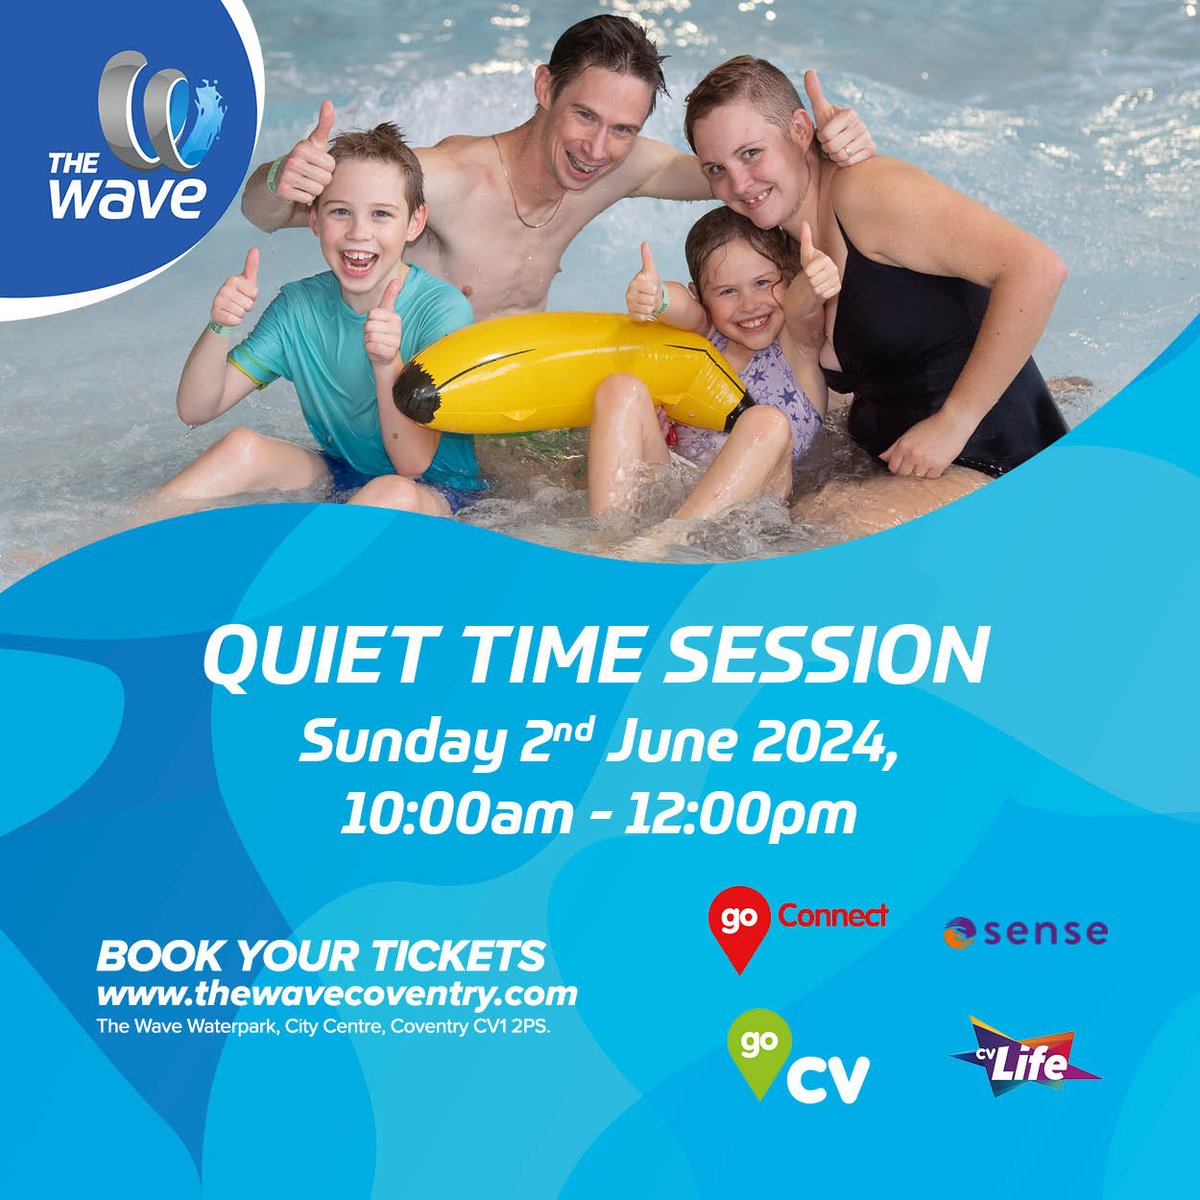 Quiet Time session at @TheWaveCov 🤫 ‼️ Go CV discounts apply ‼️ 💦 Sun 2 June 10am - 12 noon 💦 A calm & relaxing environment with no music, sensory toys in the lazy river as well as accessible changing facilities. 💦 See website ➡️ orlo.uk/R4w9s @cvlifecommunity